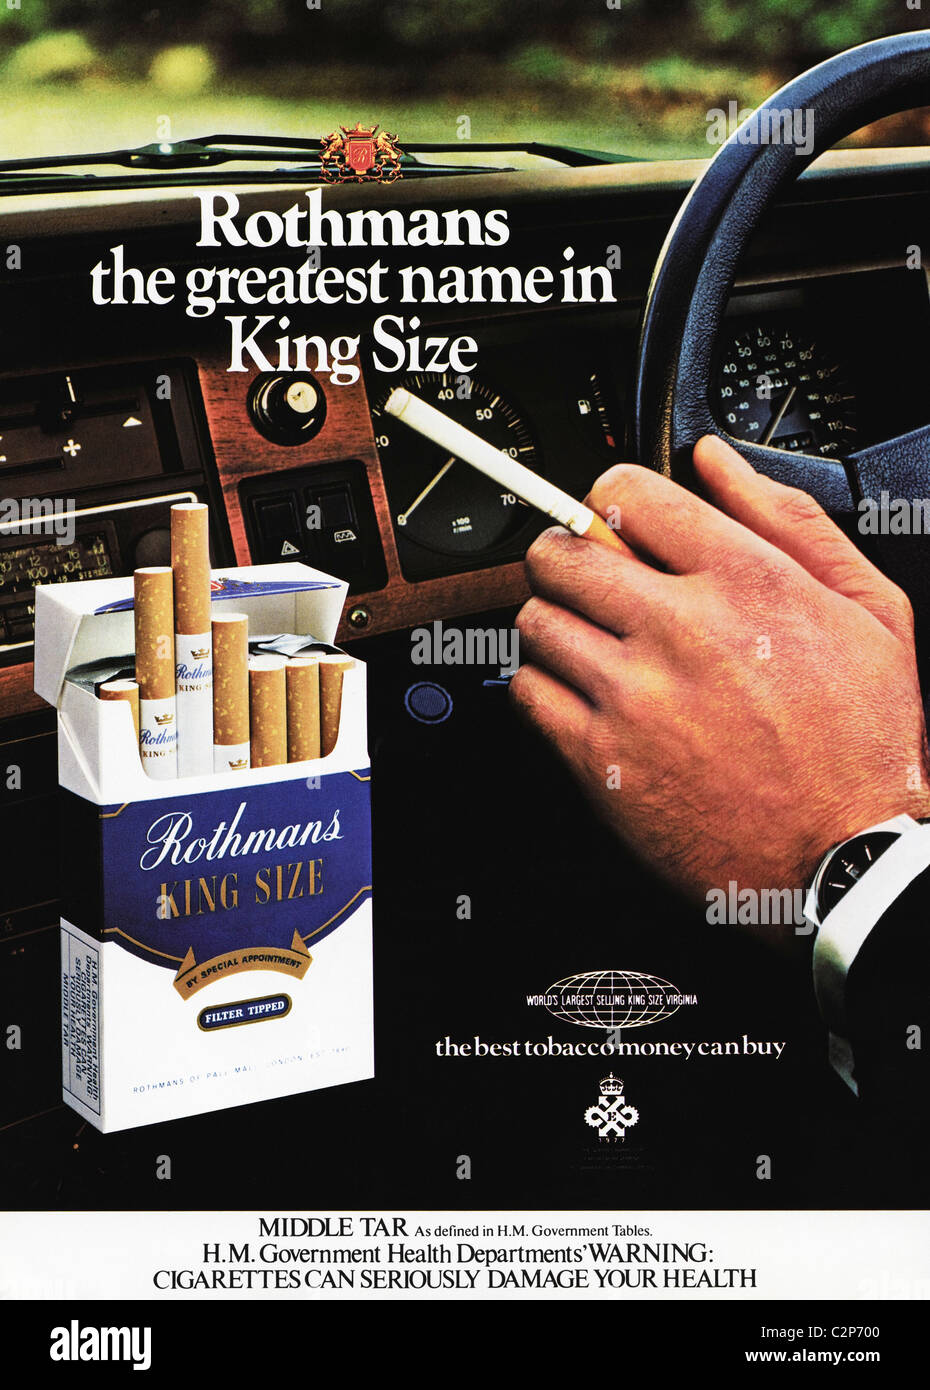 for ROTHMANS KING SIZE filter tip cigarettes in men's magazine circa 1978 Photo - Alamy